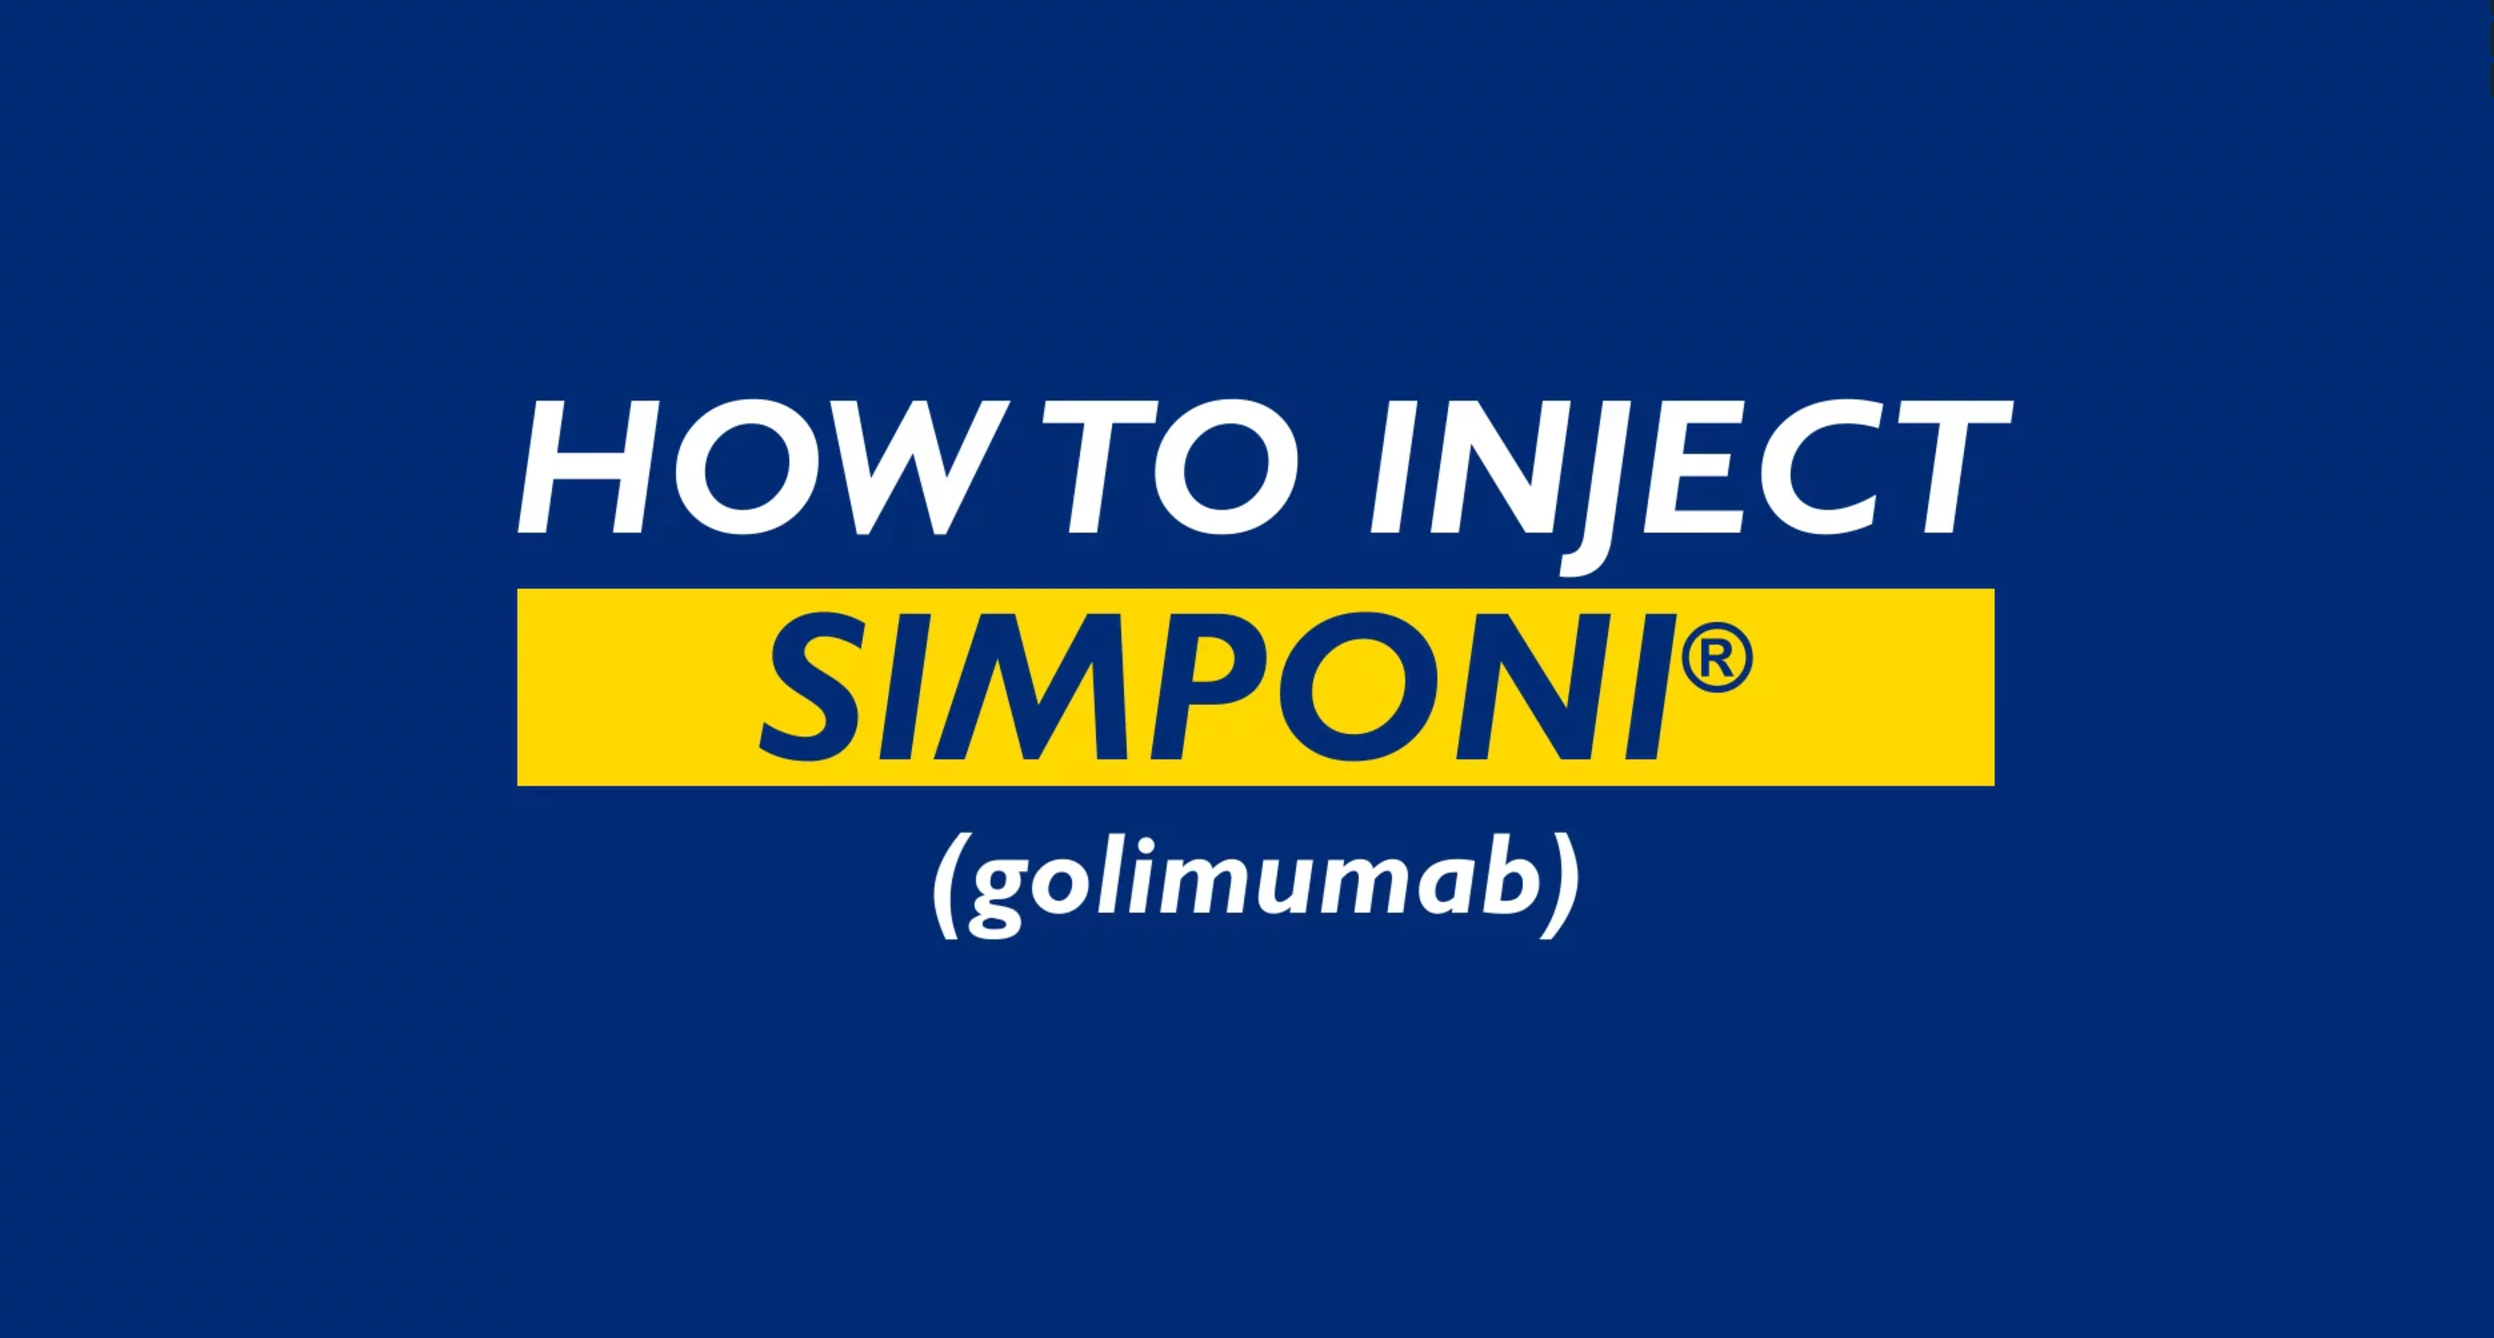 How to Inject Simponi (golimumab)